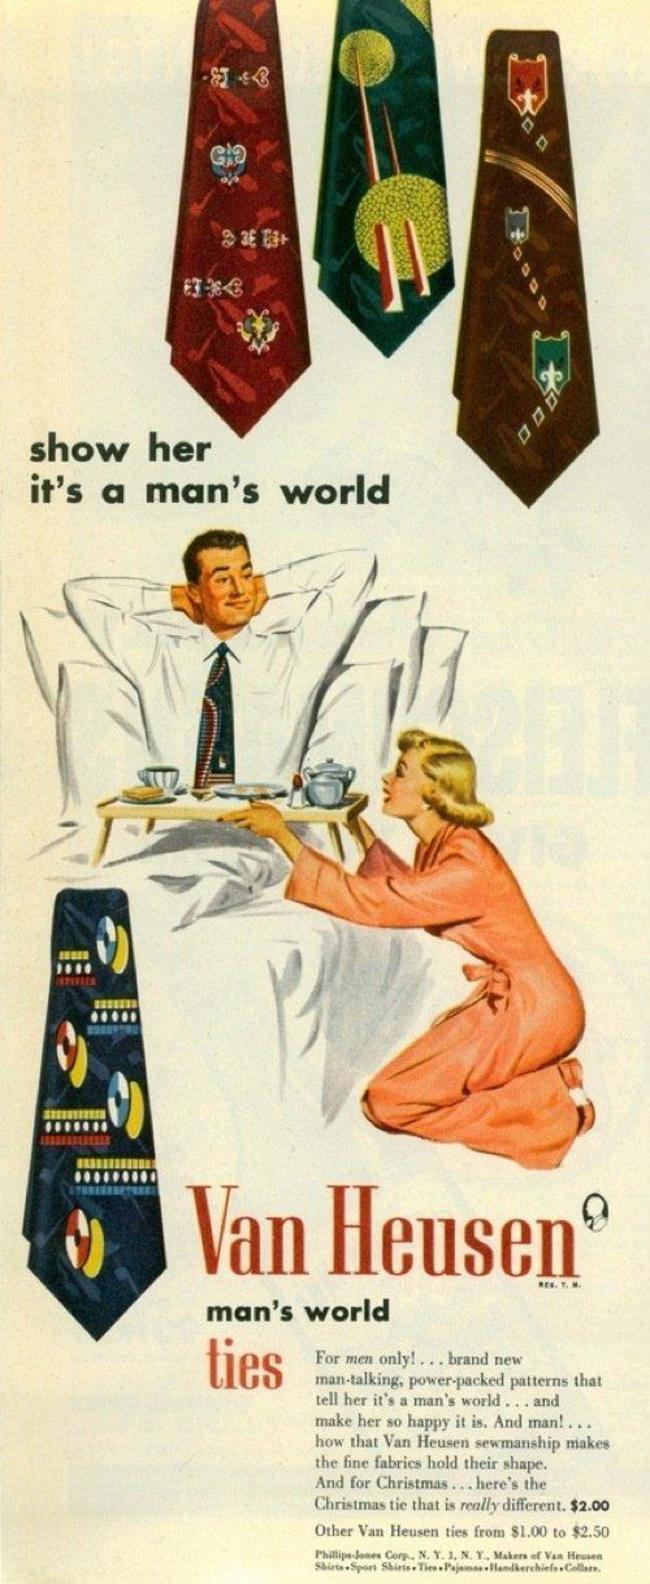 30 Vintage Sexist Ads That Would Create Outrage If Used Today!